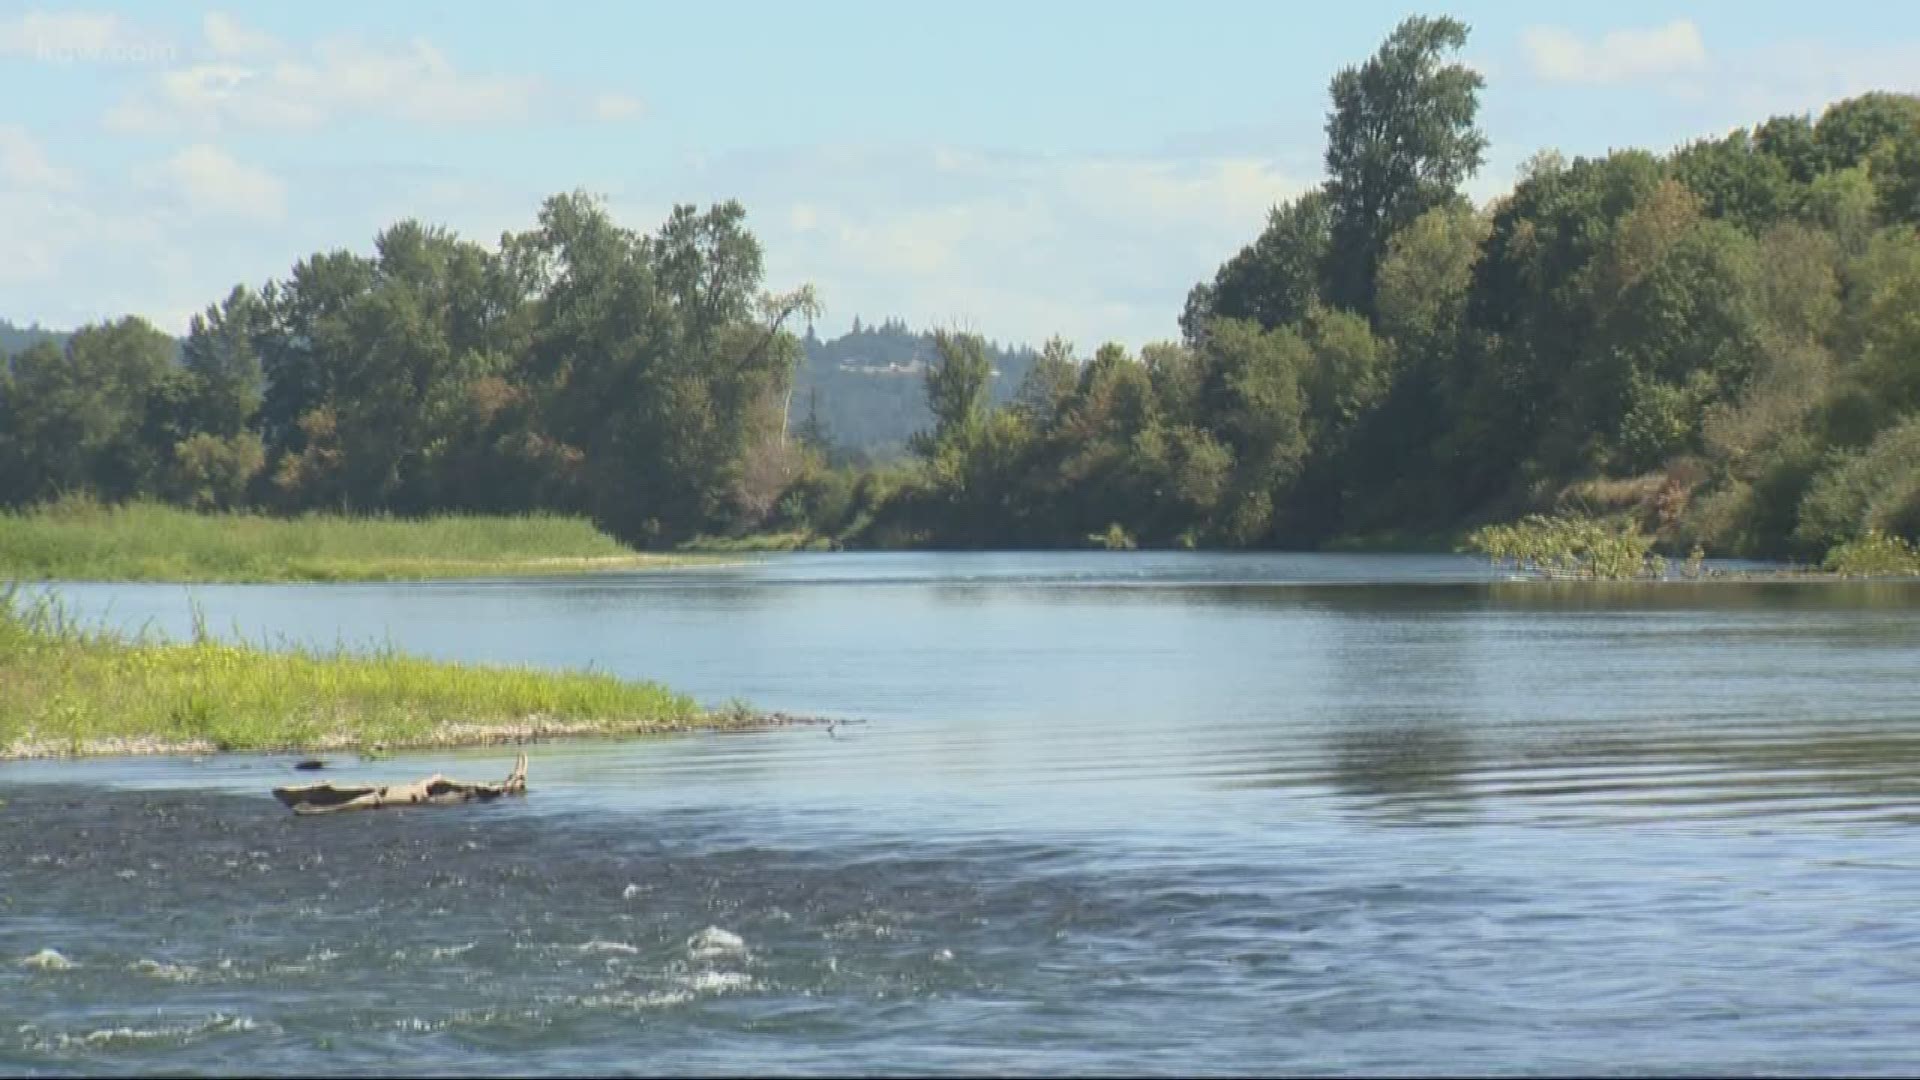 Body of woman found in Willamette River after official search was suspended